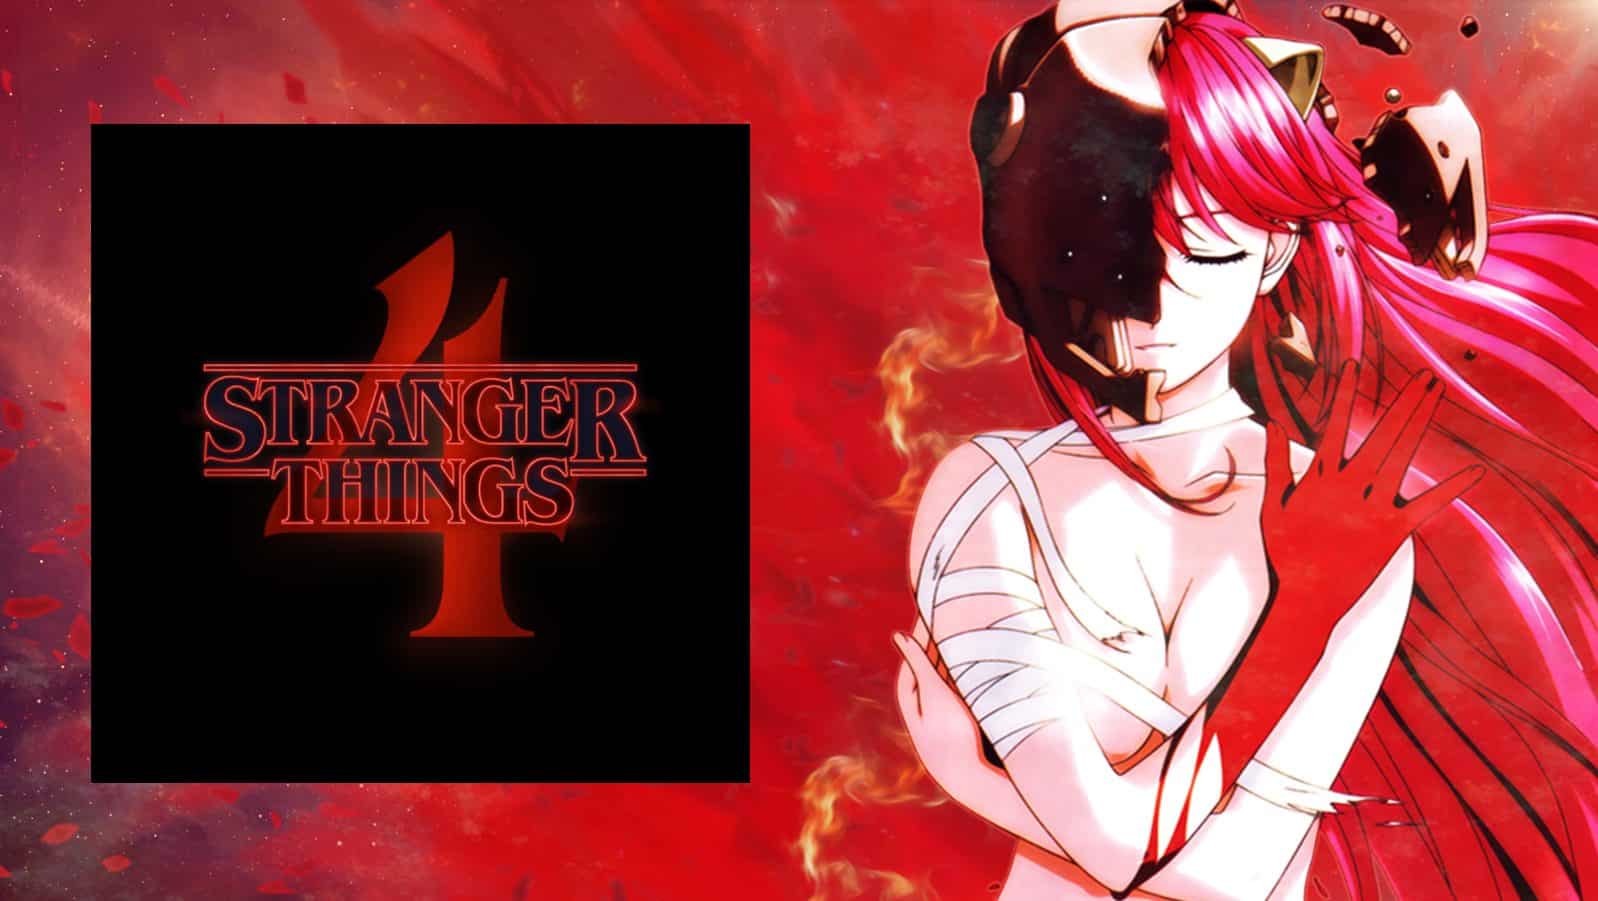 lucy from elfen lied and the stranger things logo